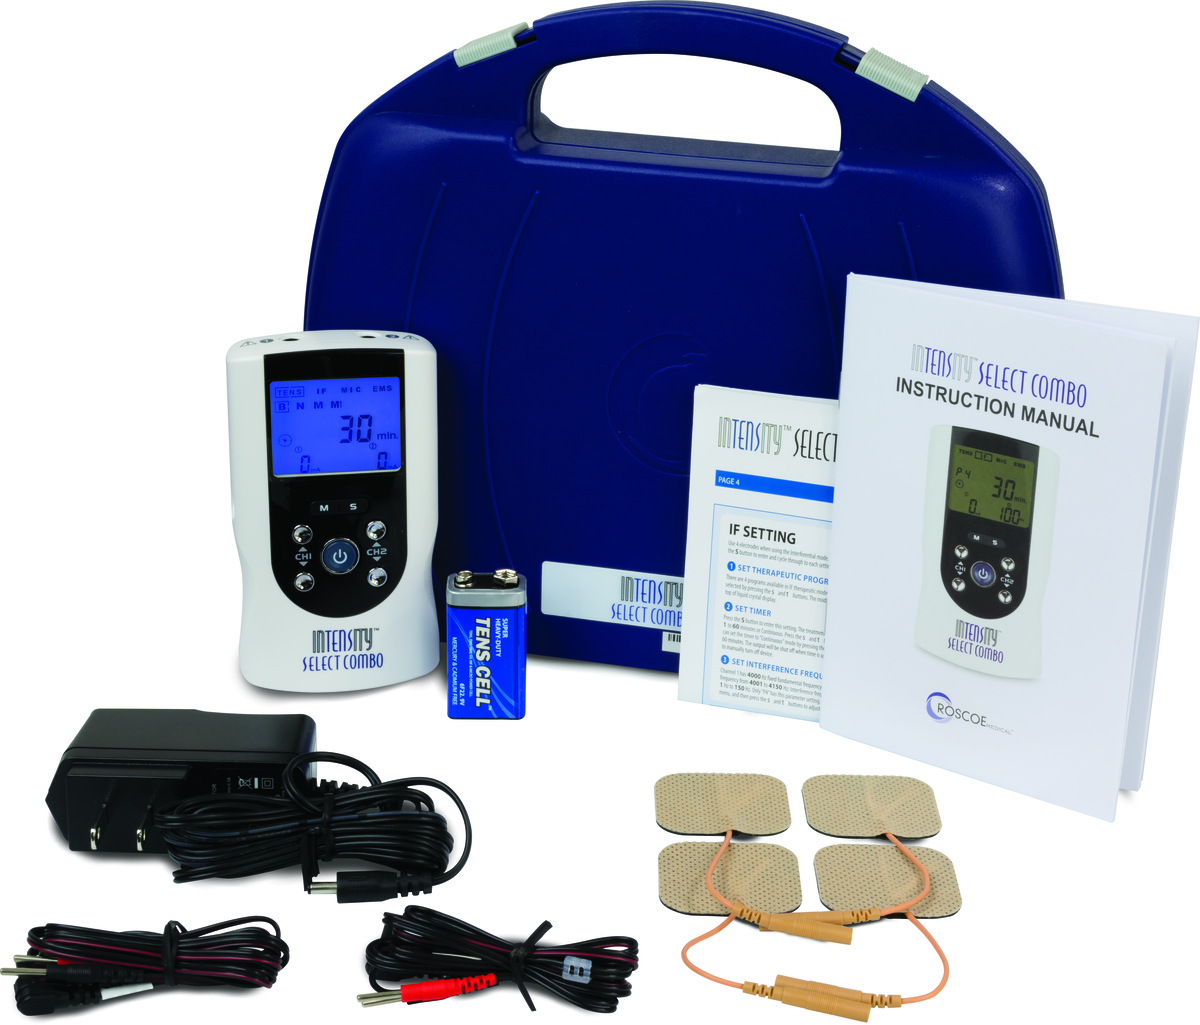 InTENSity Select Combo - TENS/IF/MIC/EMS - Integrated Medical